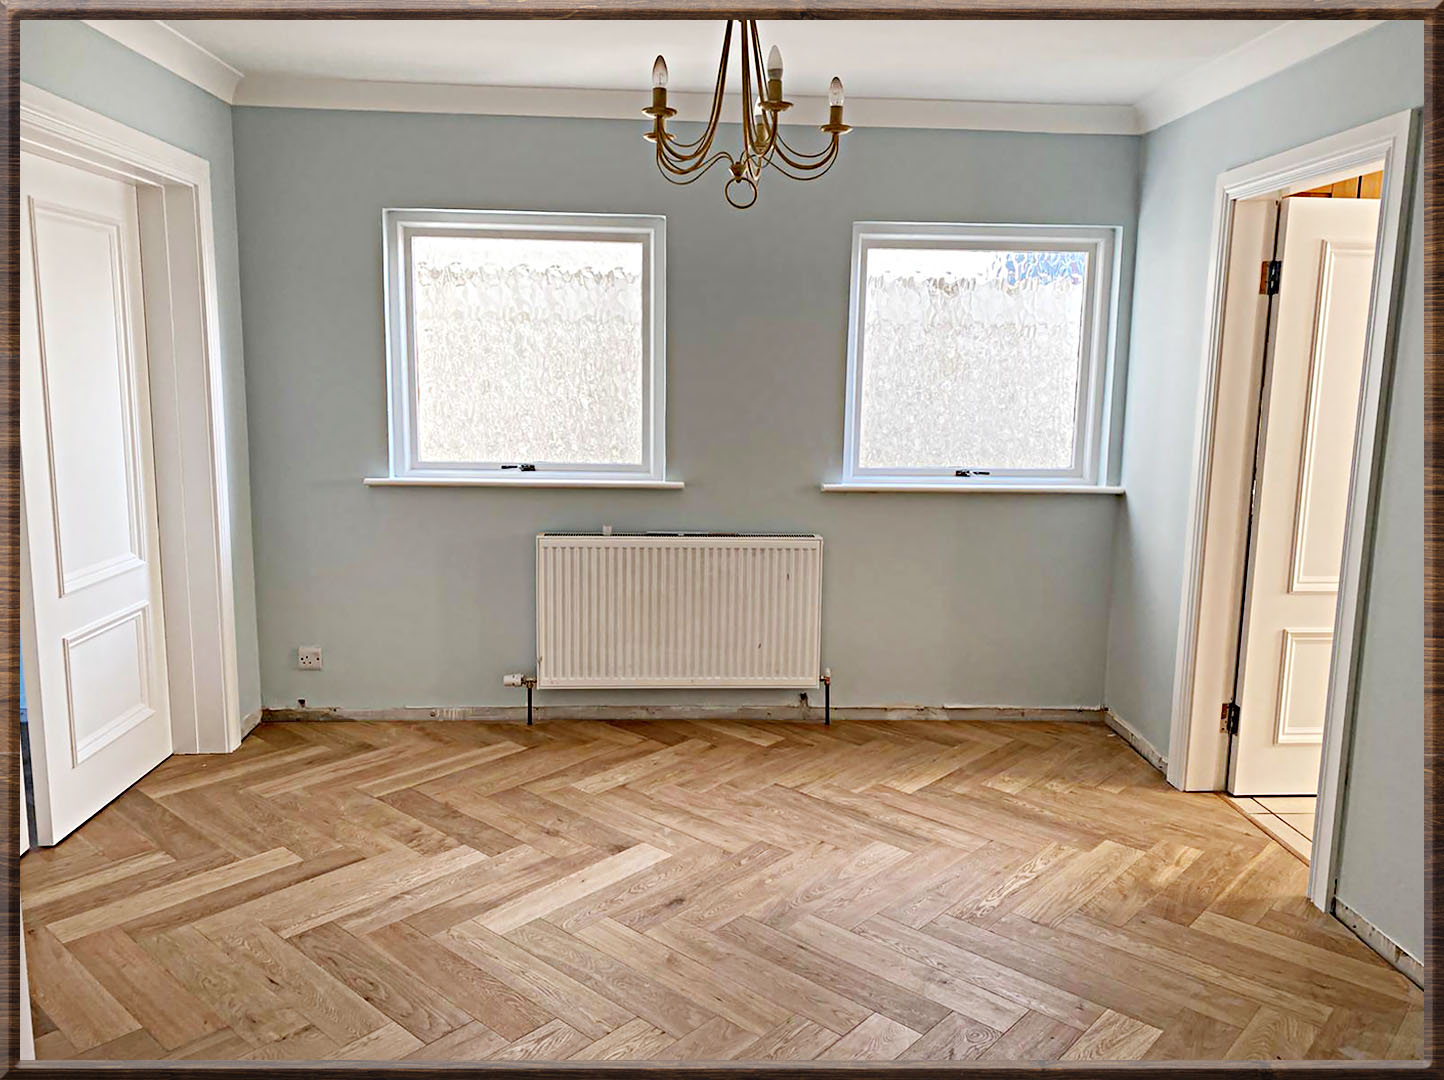 BG Carpentry Services fitted floors